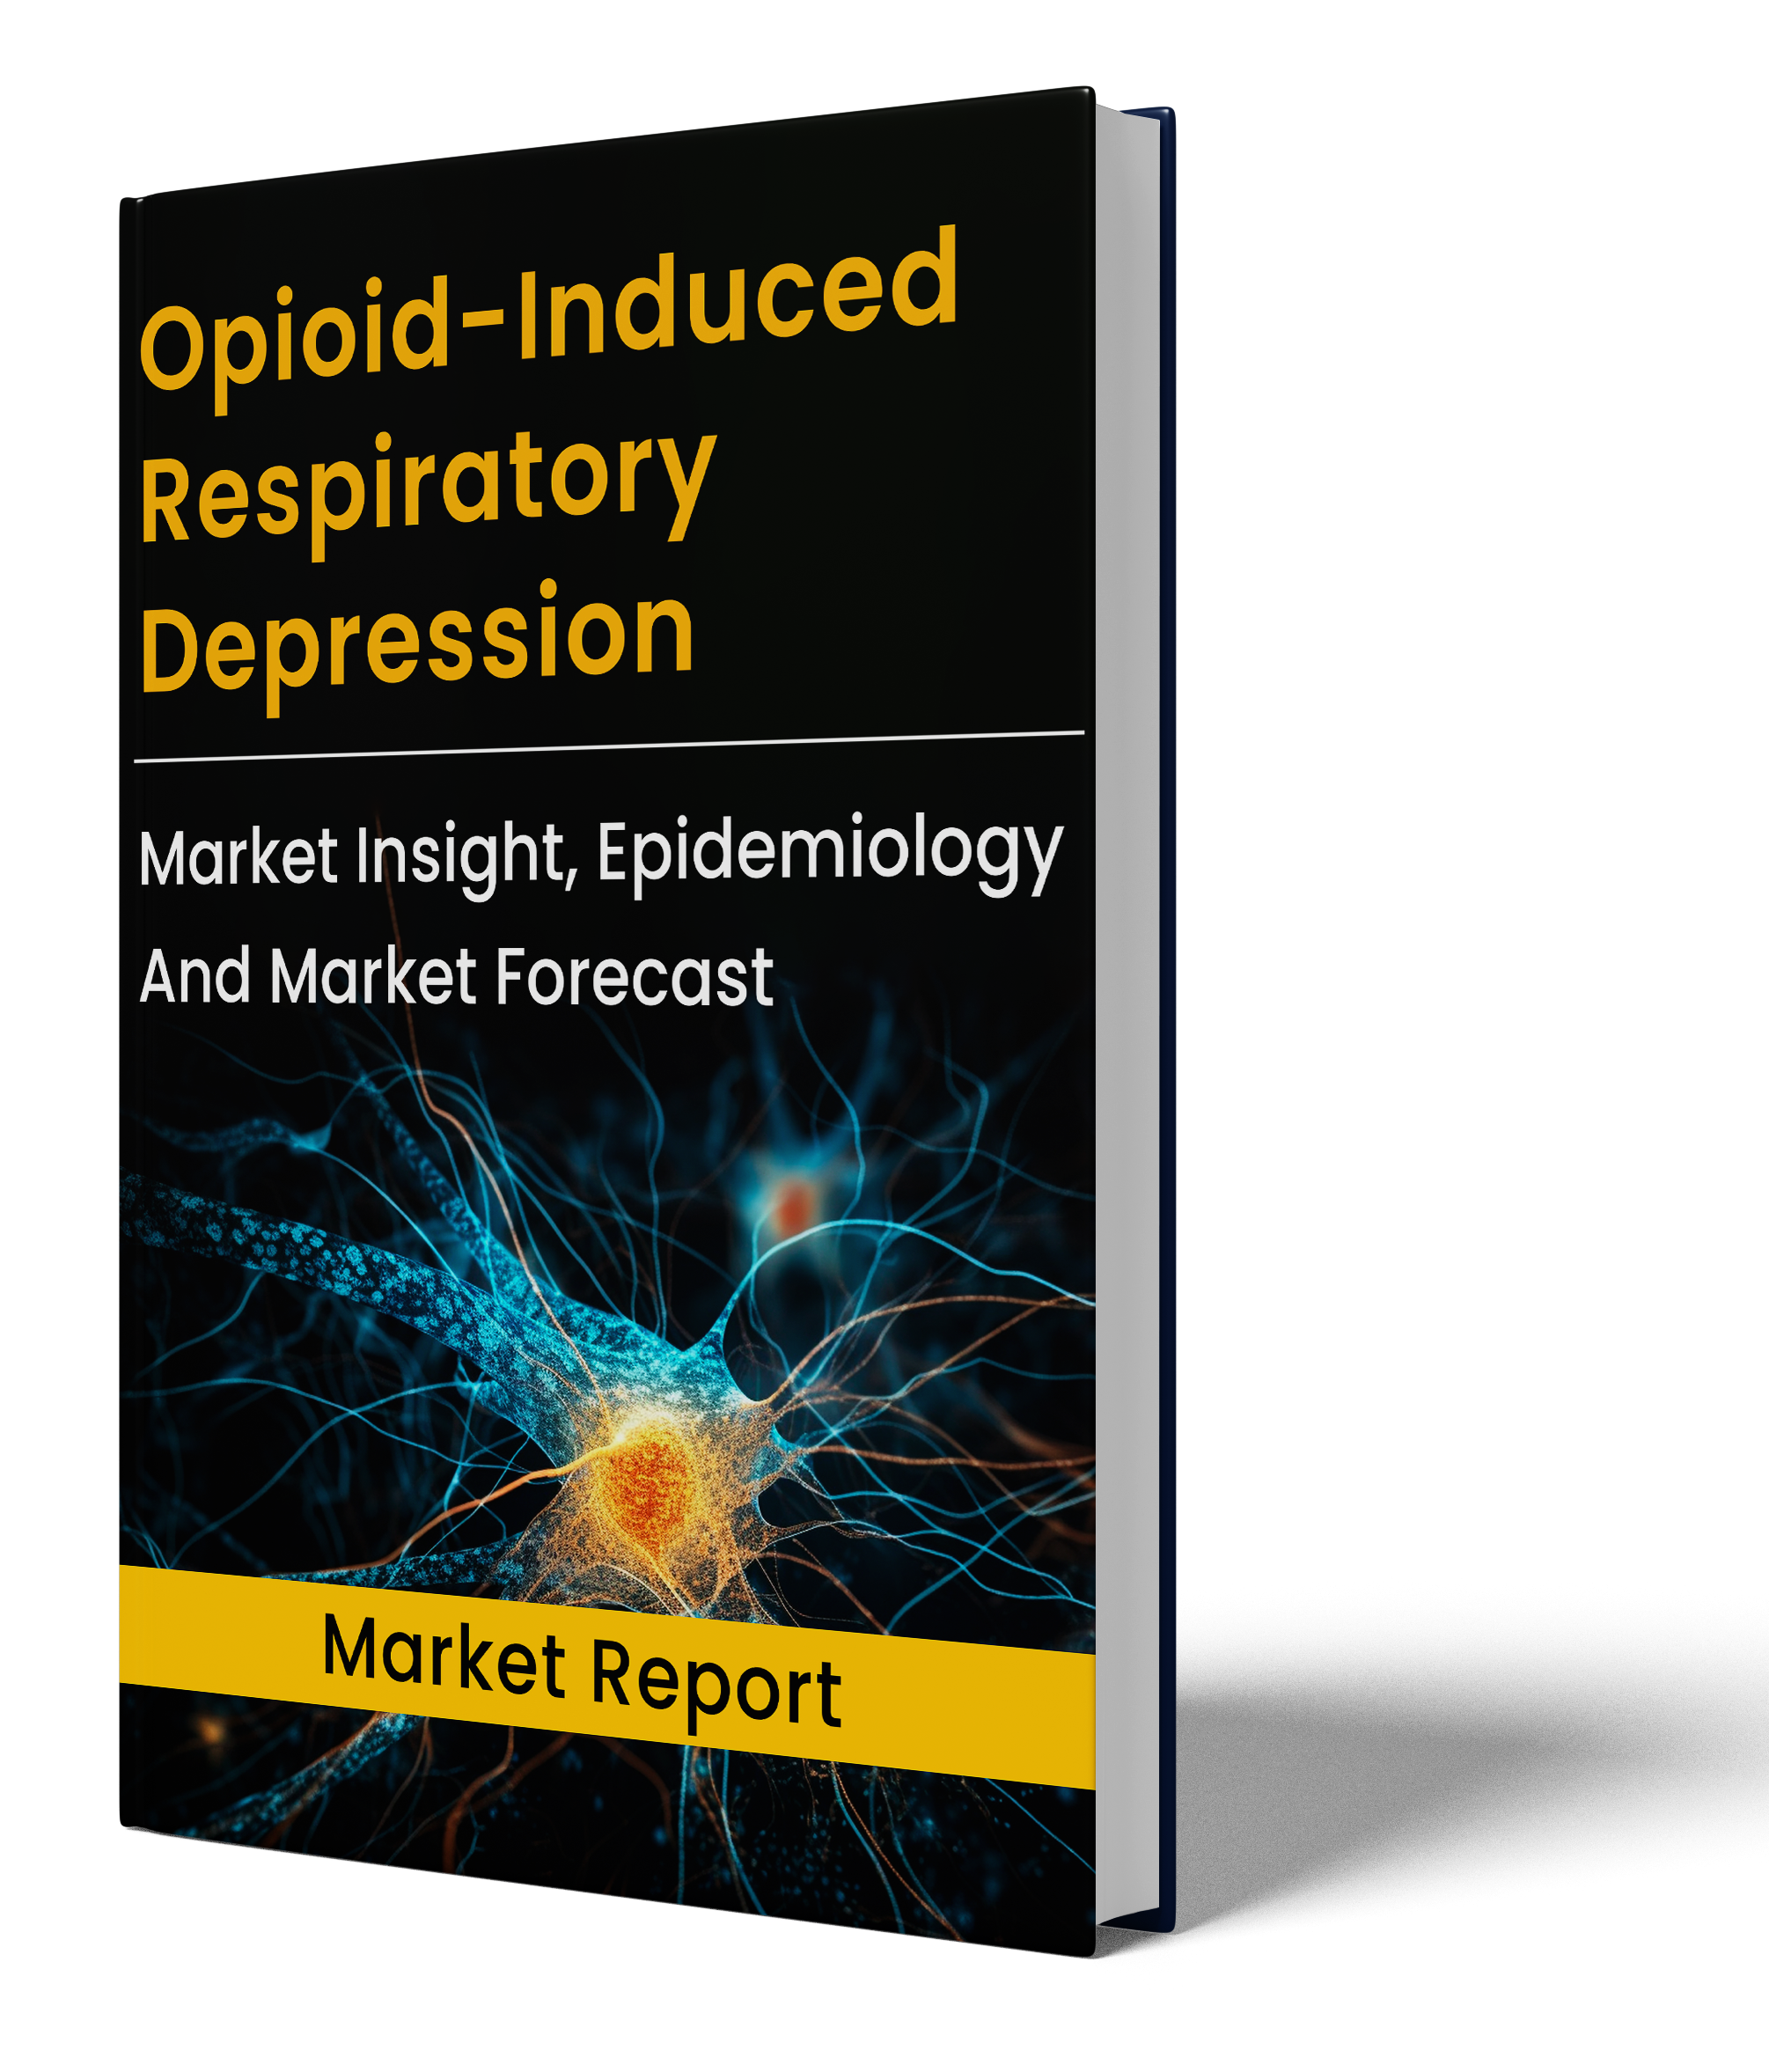 Opioid-Induced Respiratory Depression market report